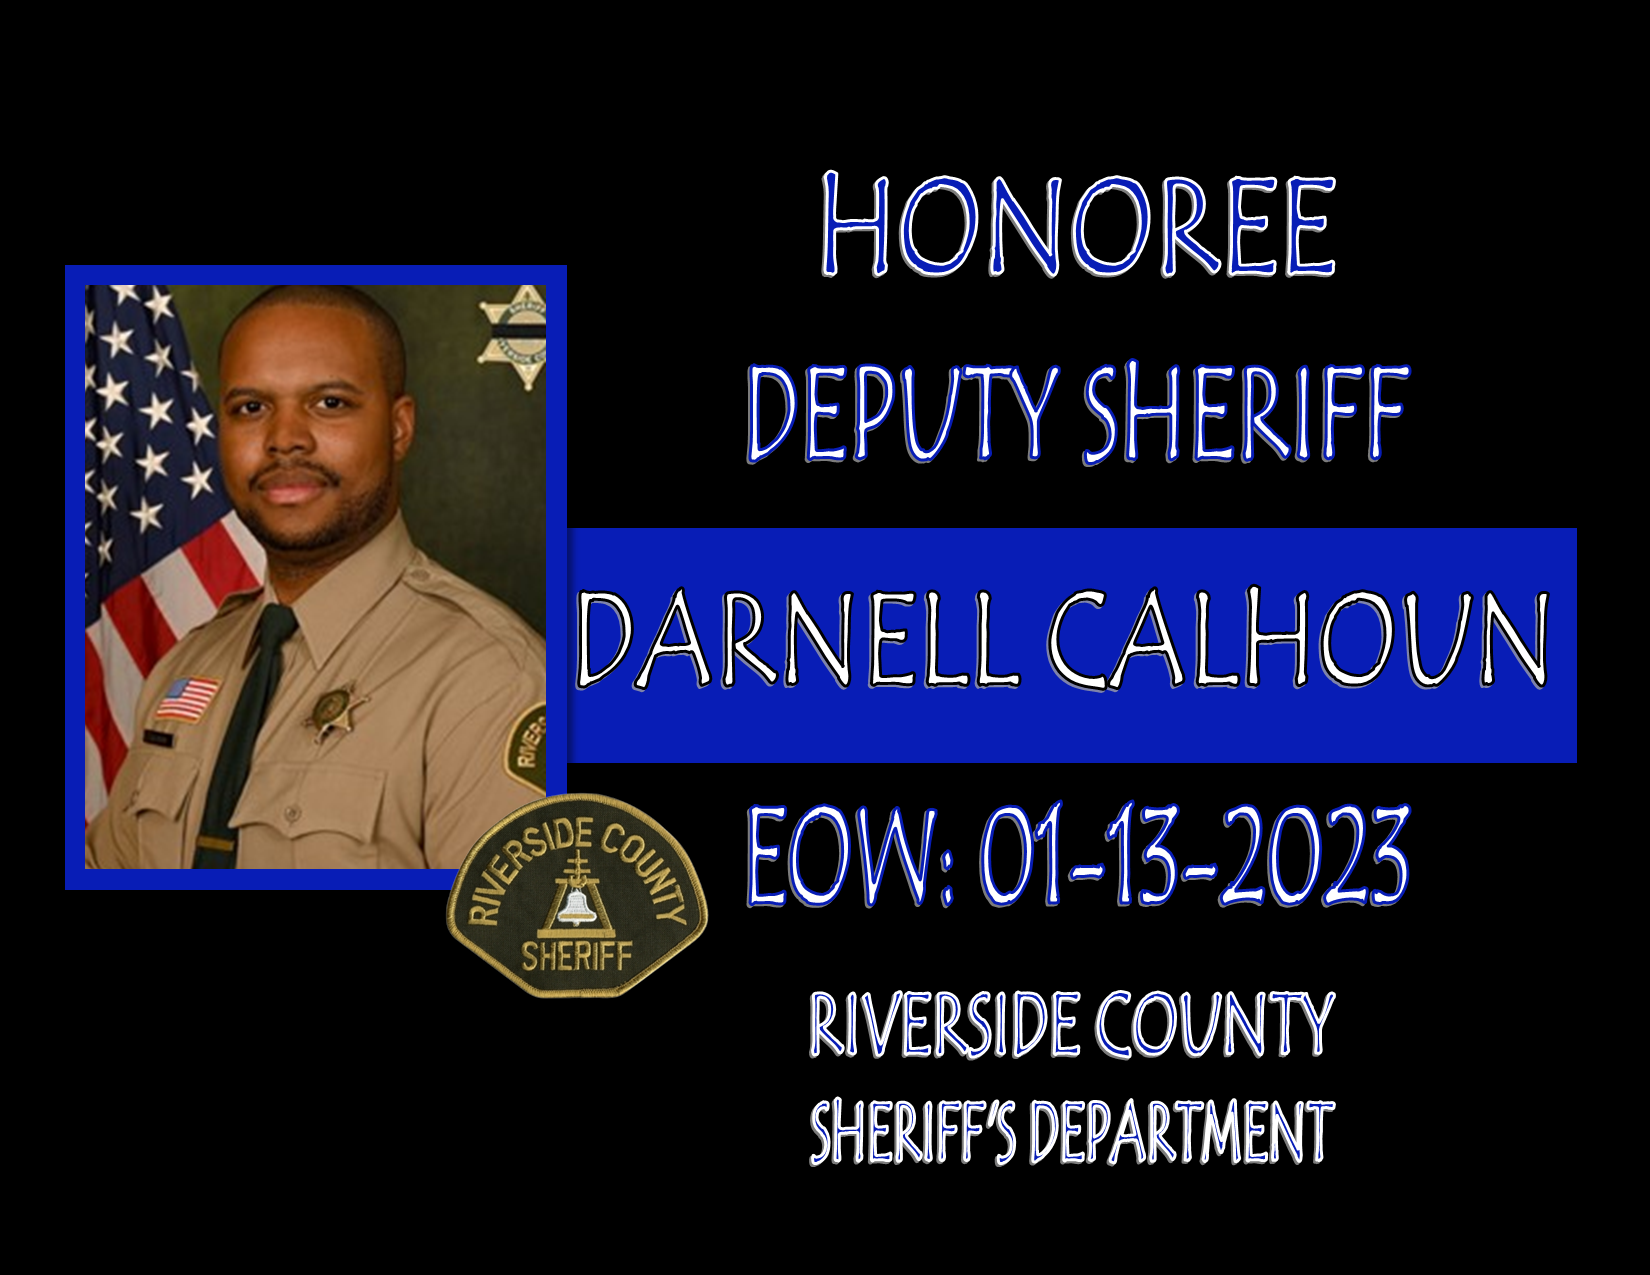 Darnell Calhoun Honoree Photo PNG.png